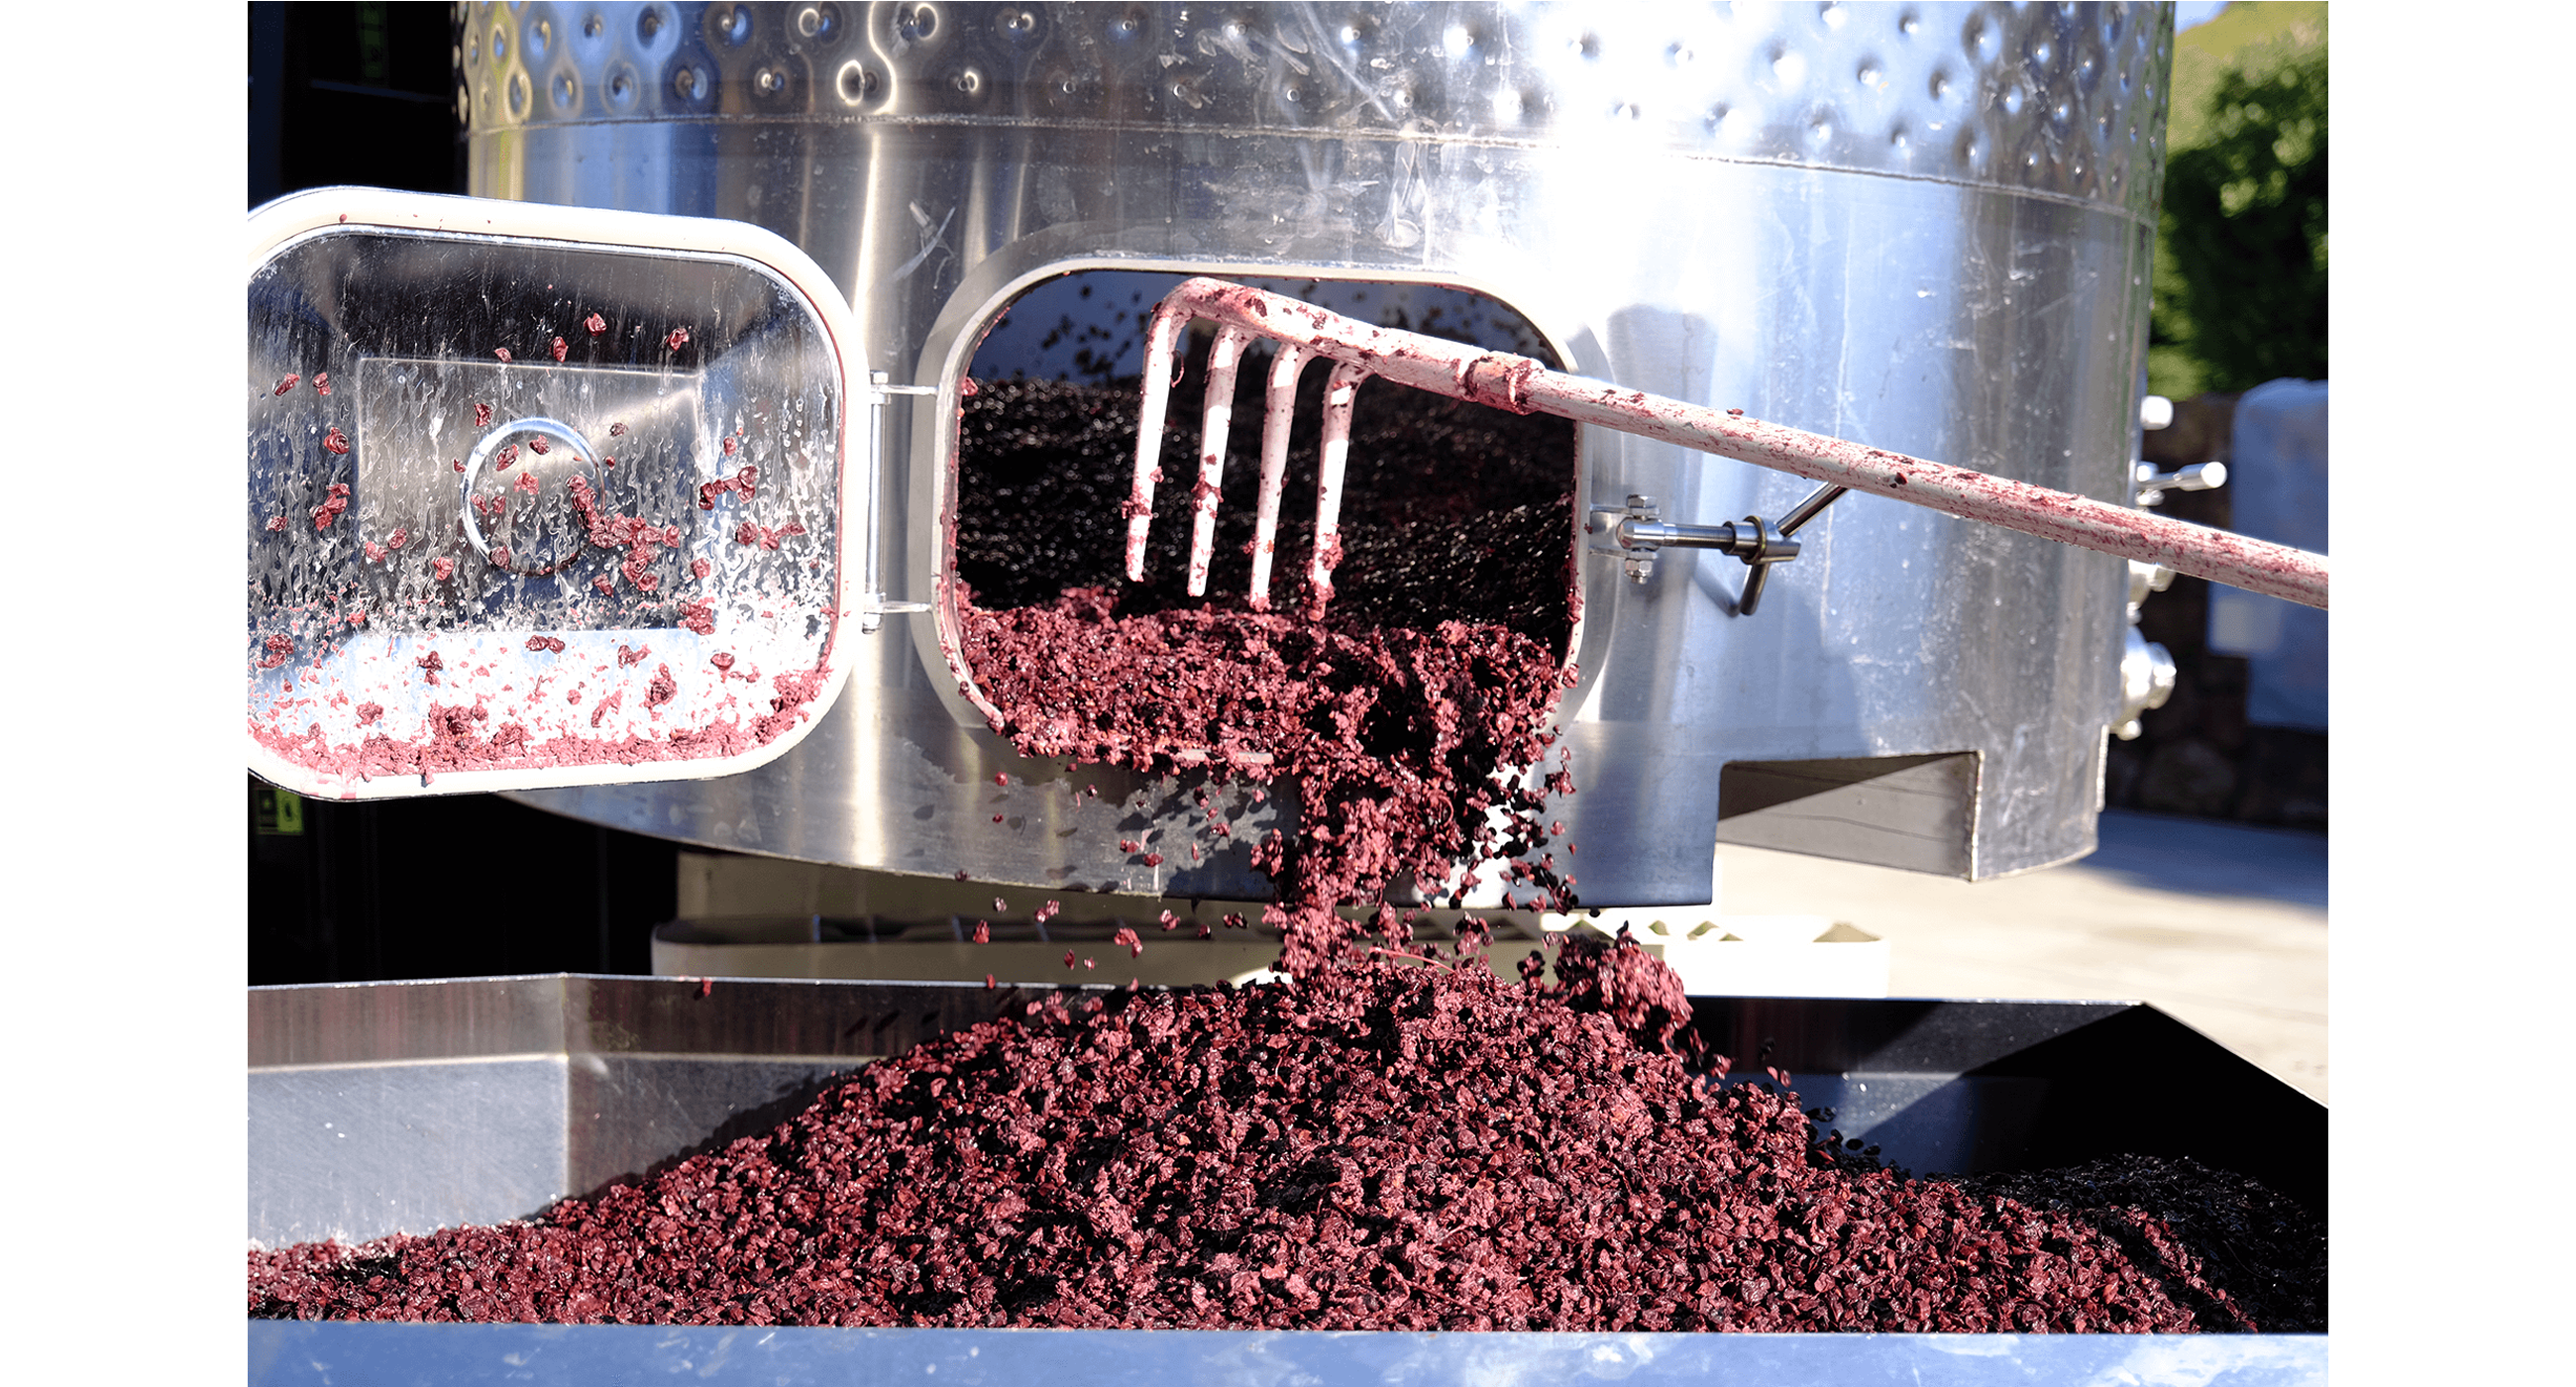 Bright purple grape skins are shown being dug out of a stainless steel tank.